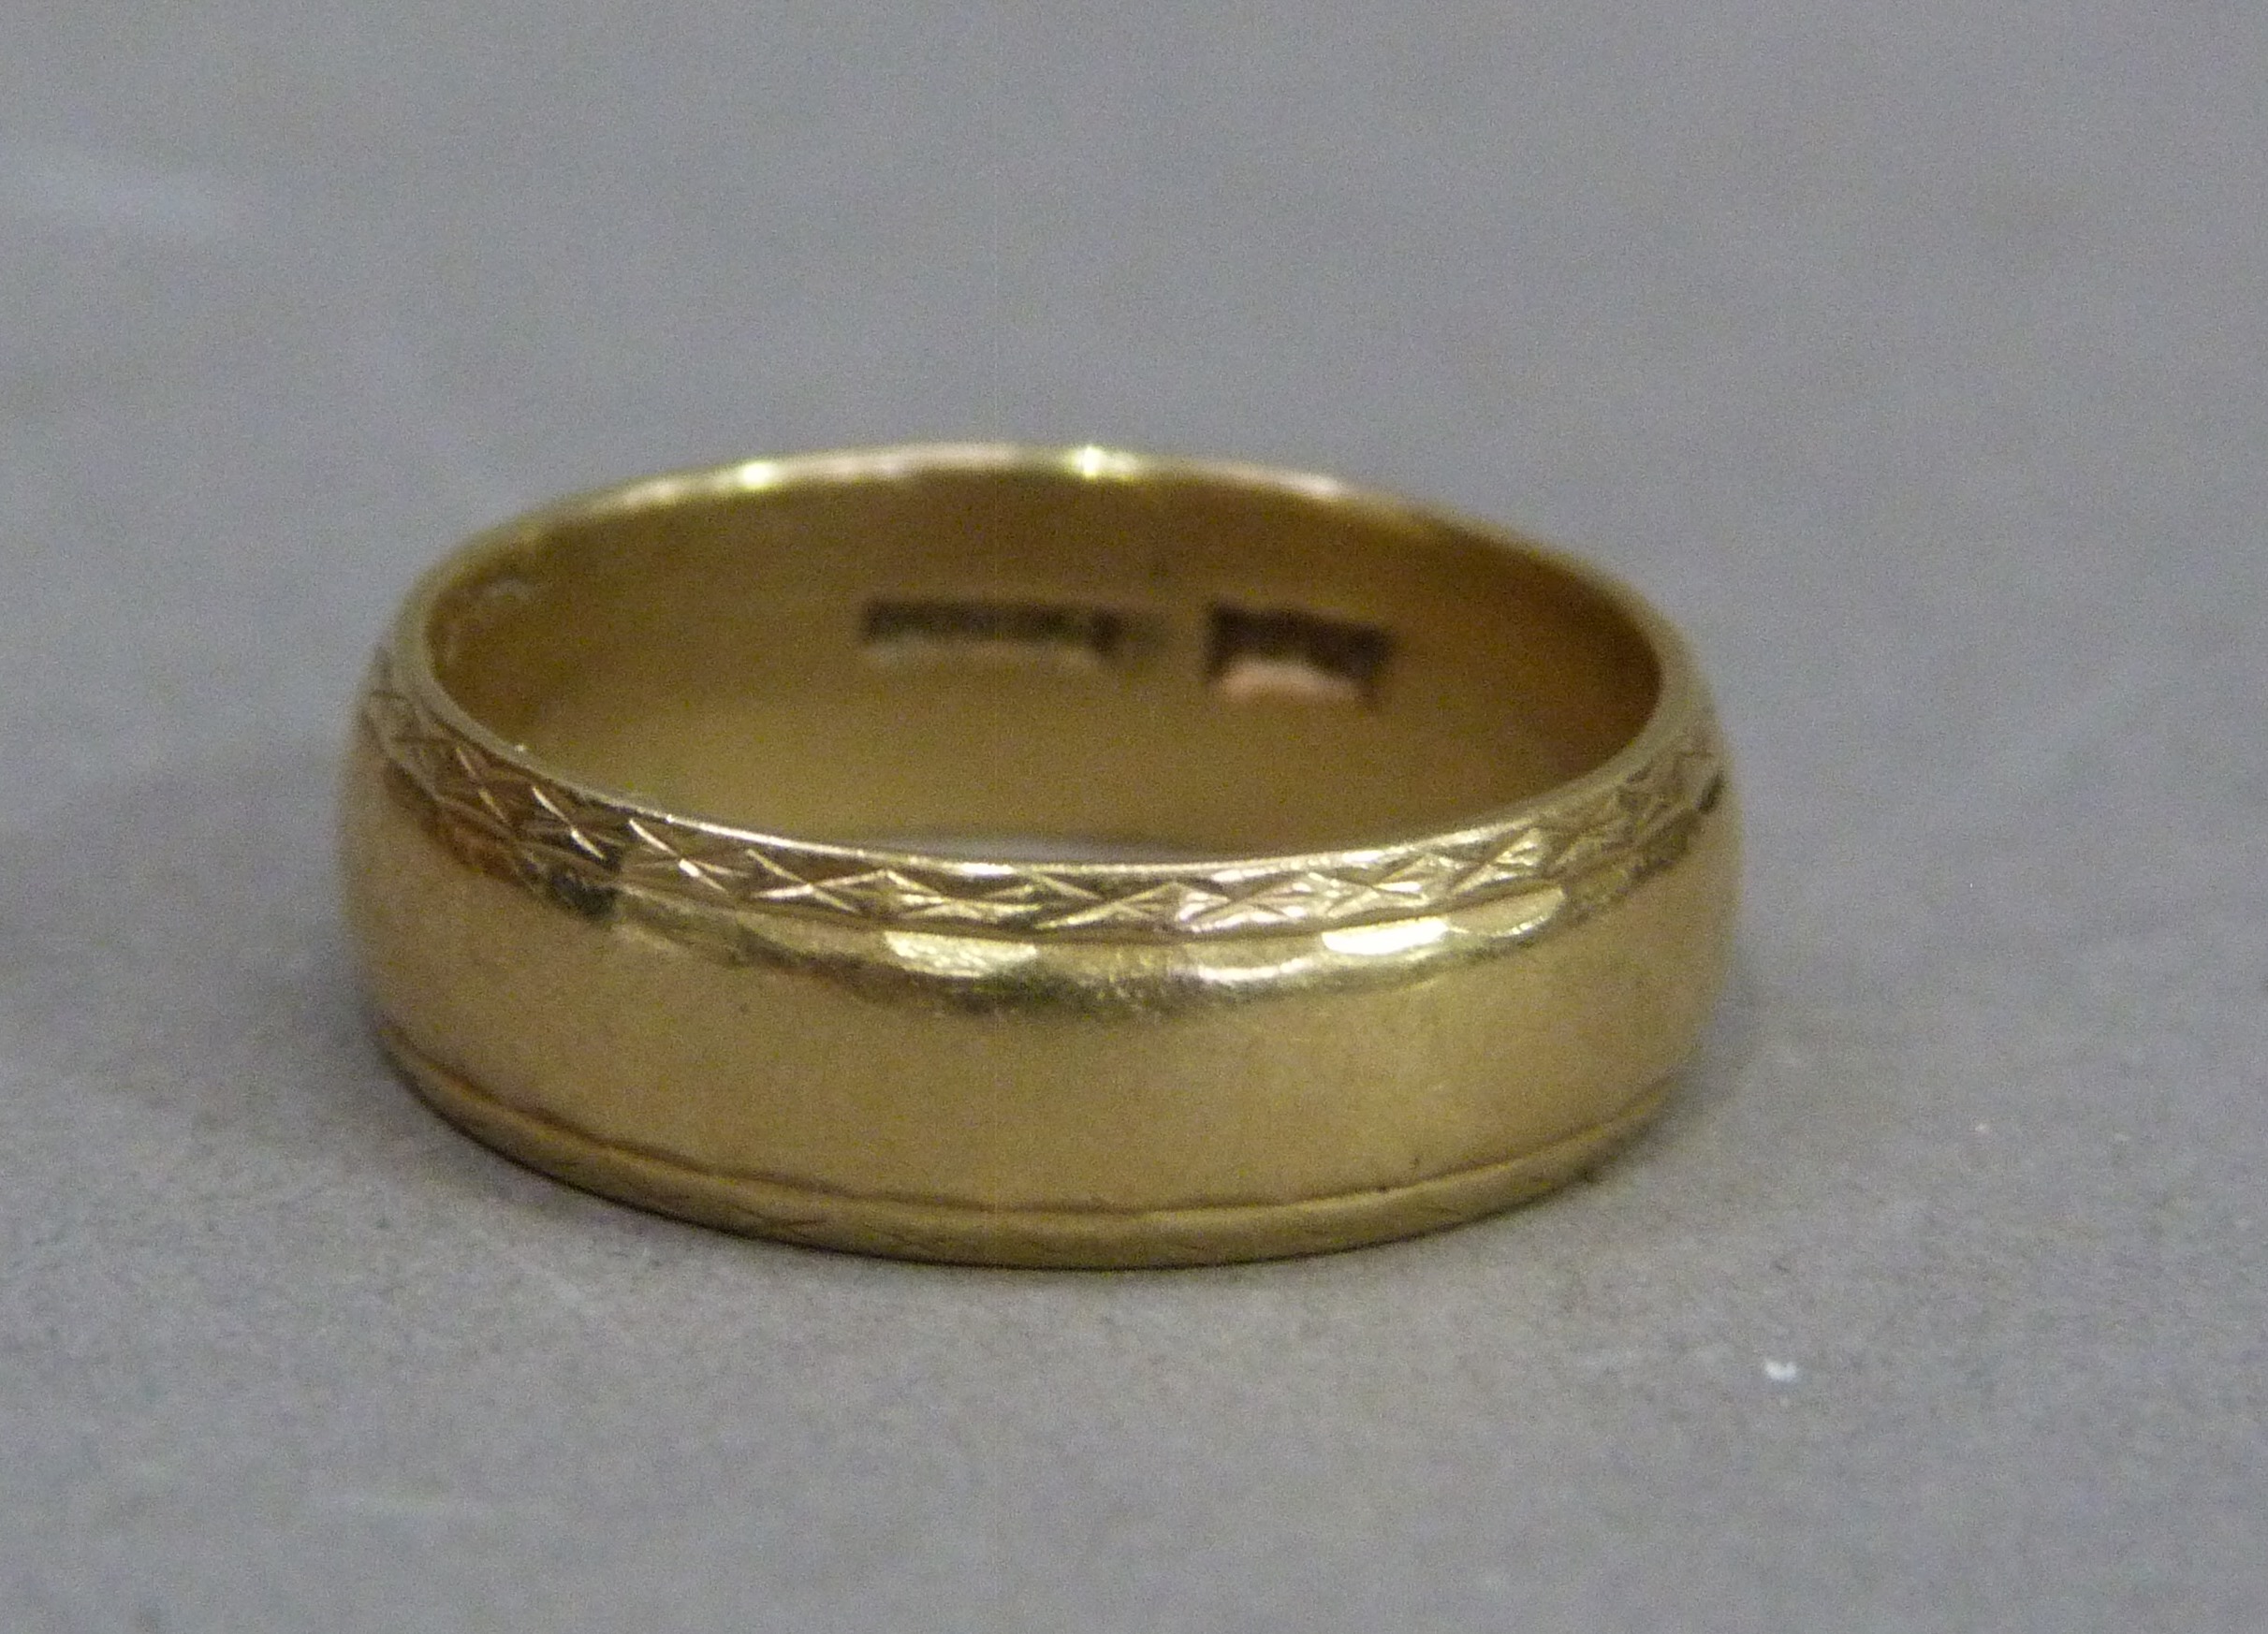 A wedding ring in 18ct gold, approximate weight 6gm